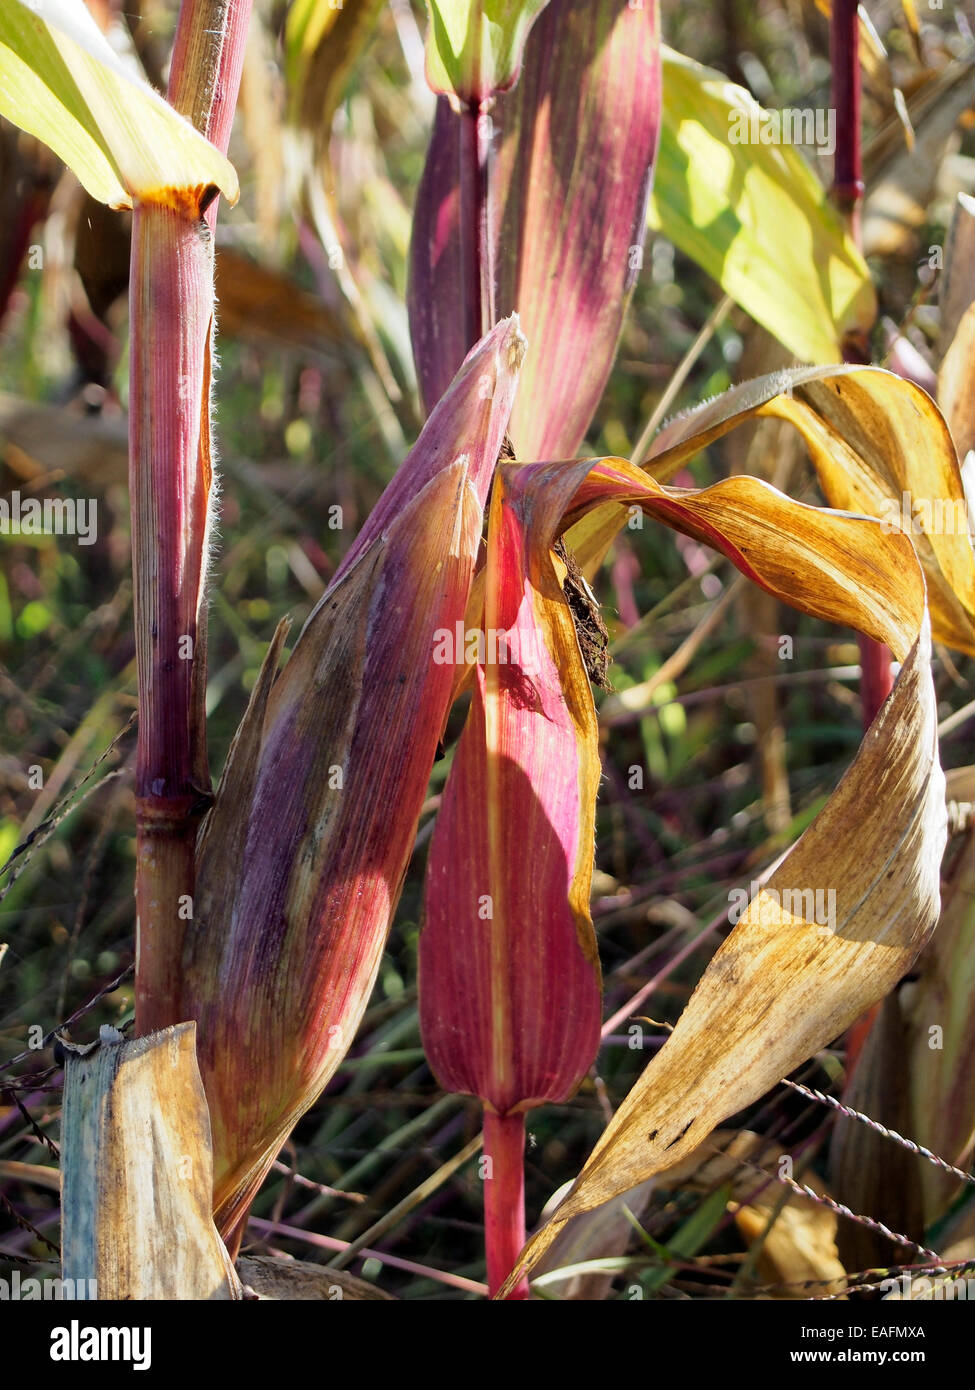 Maize plant ready for harvesting with a kernel or cob covered by its protective husk. This crop is for animal feed. Stock Photo